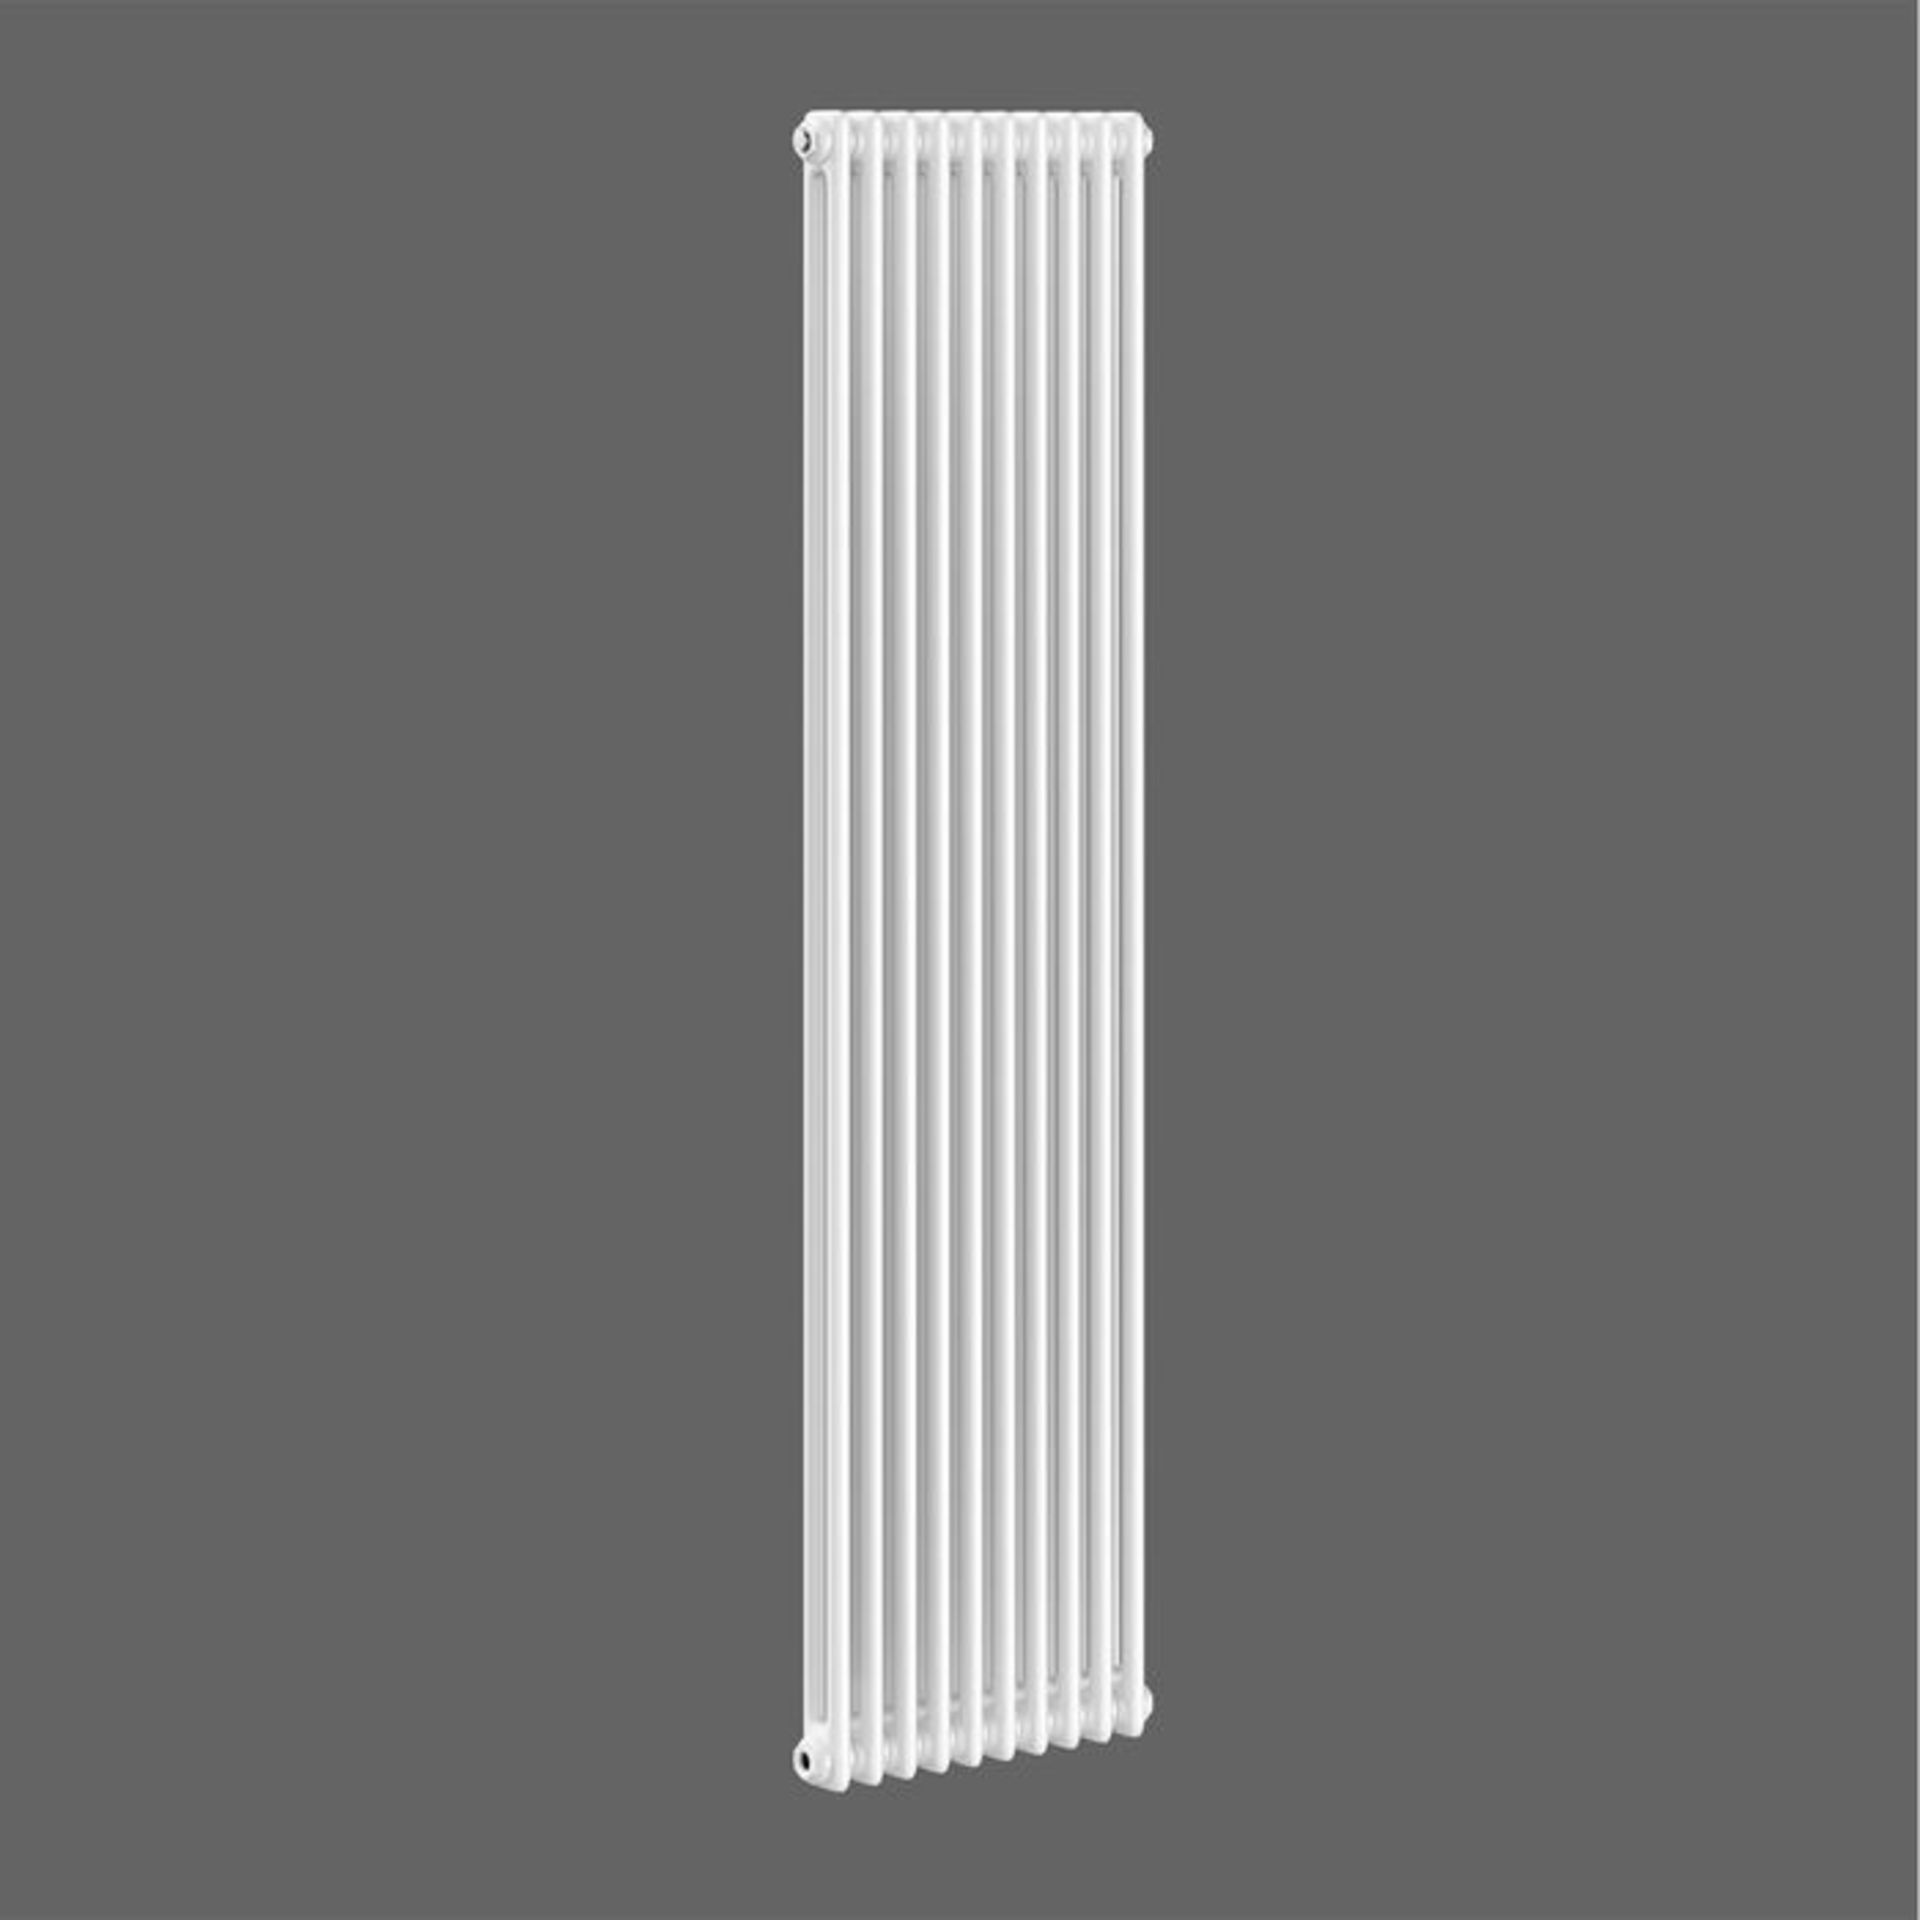 (PP134) 2000x490mm White Double Panel Vertical Colosseum Traditional Radiator. RRP £488.99. MadeFrom - Image 8 of 8